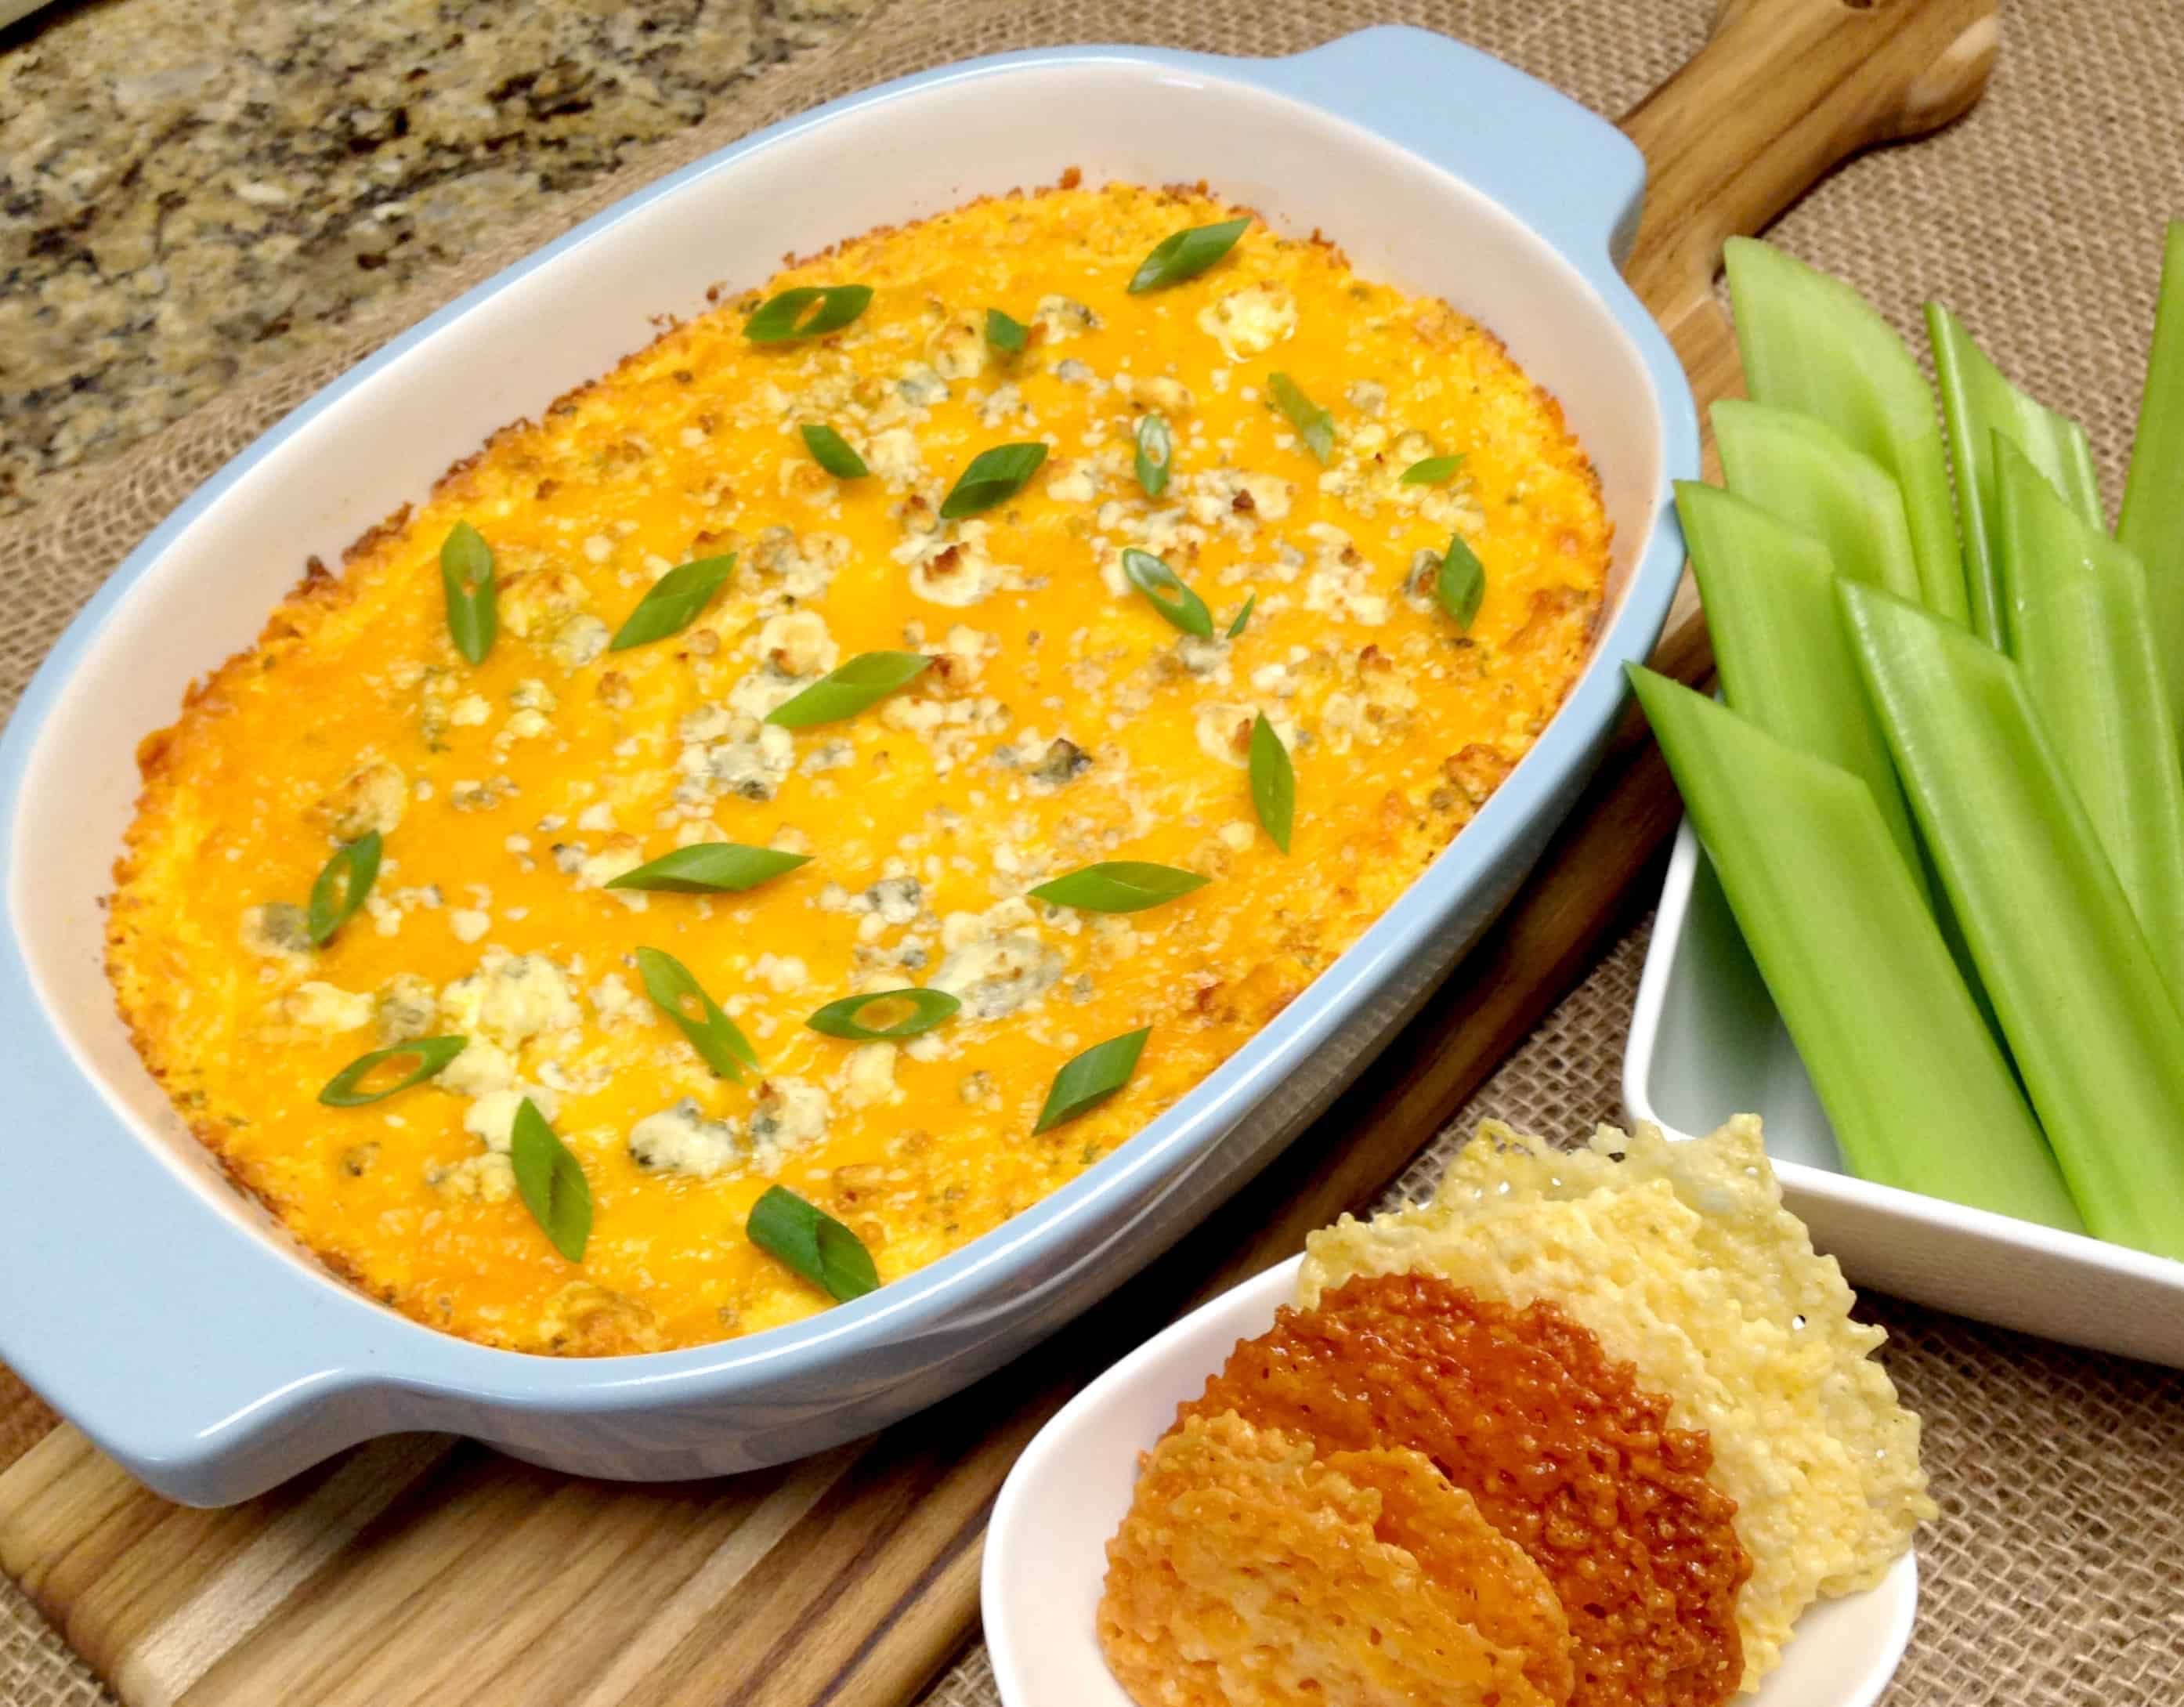 Buffalo Chicken Dip - Keto and Low Carb